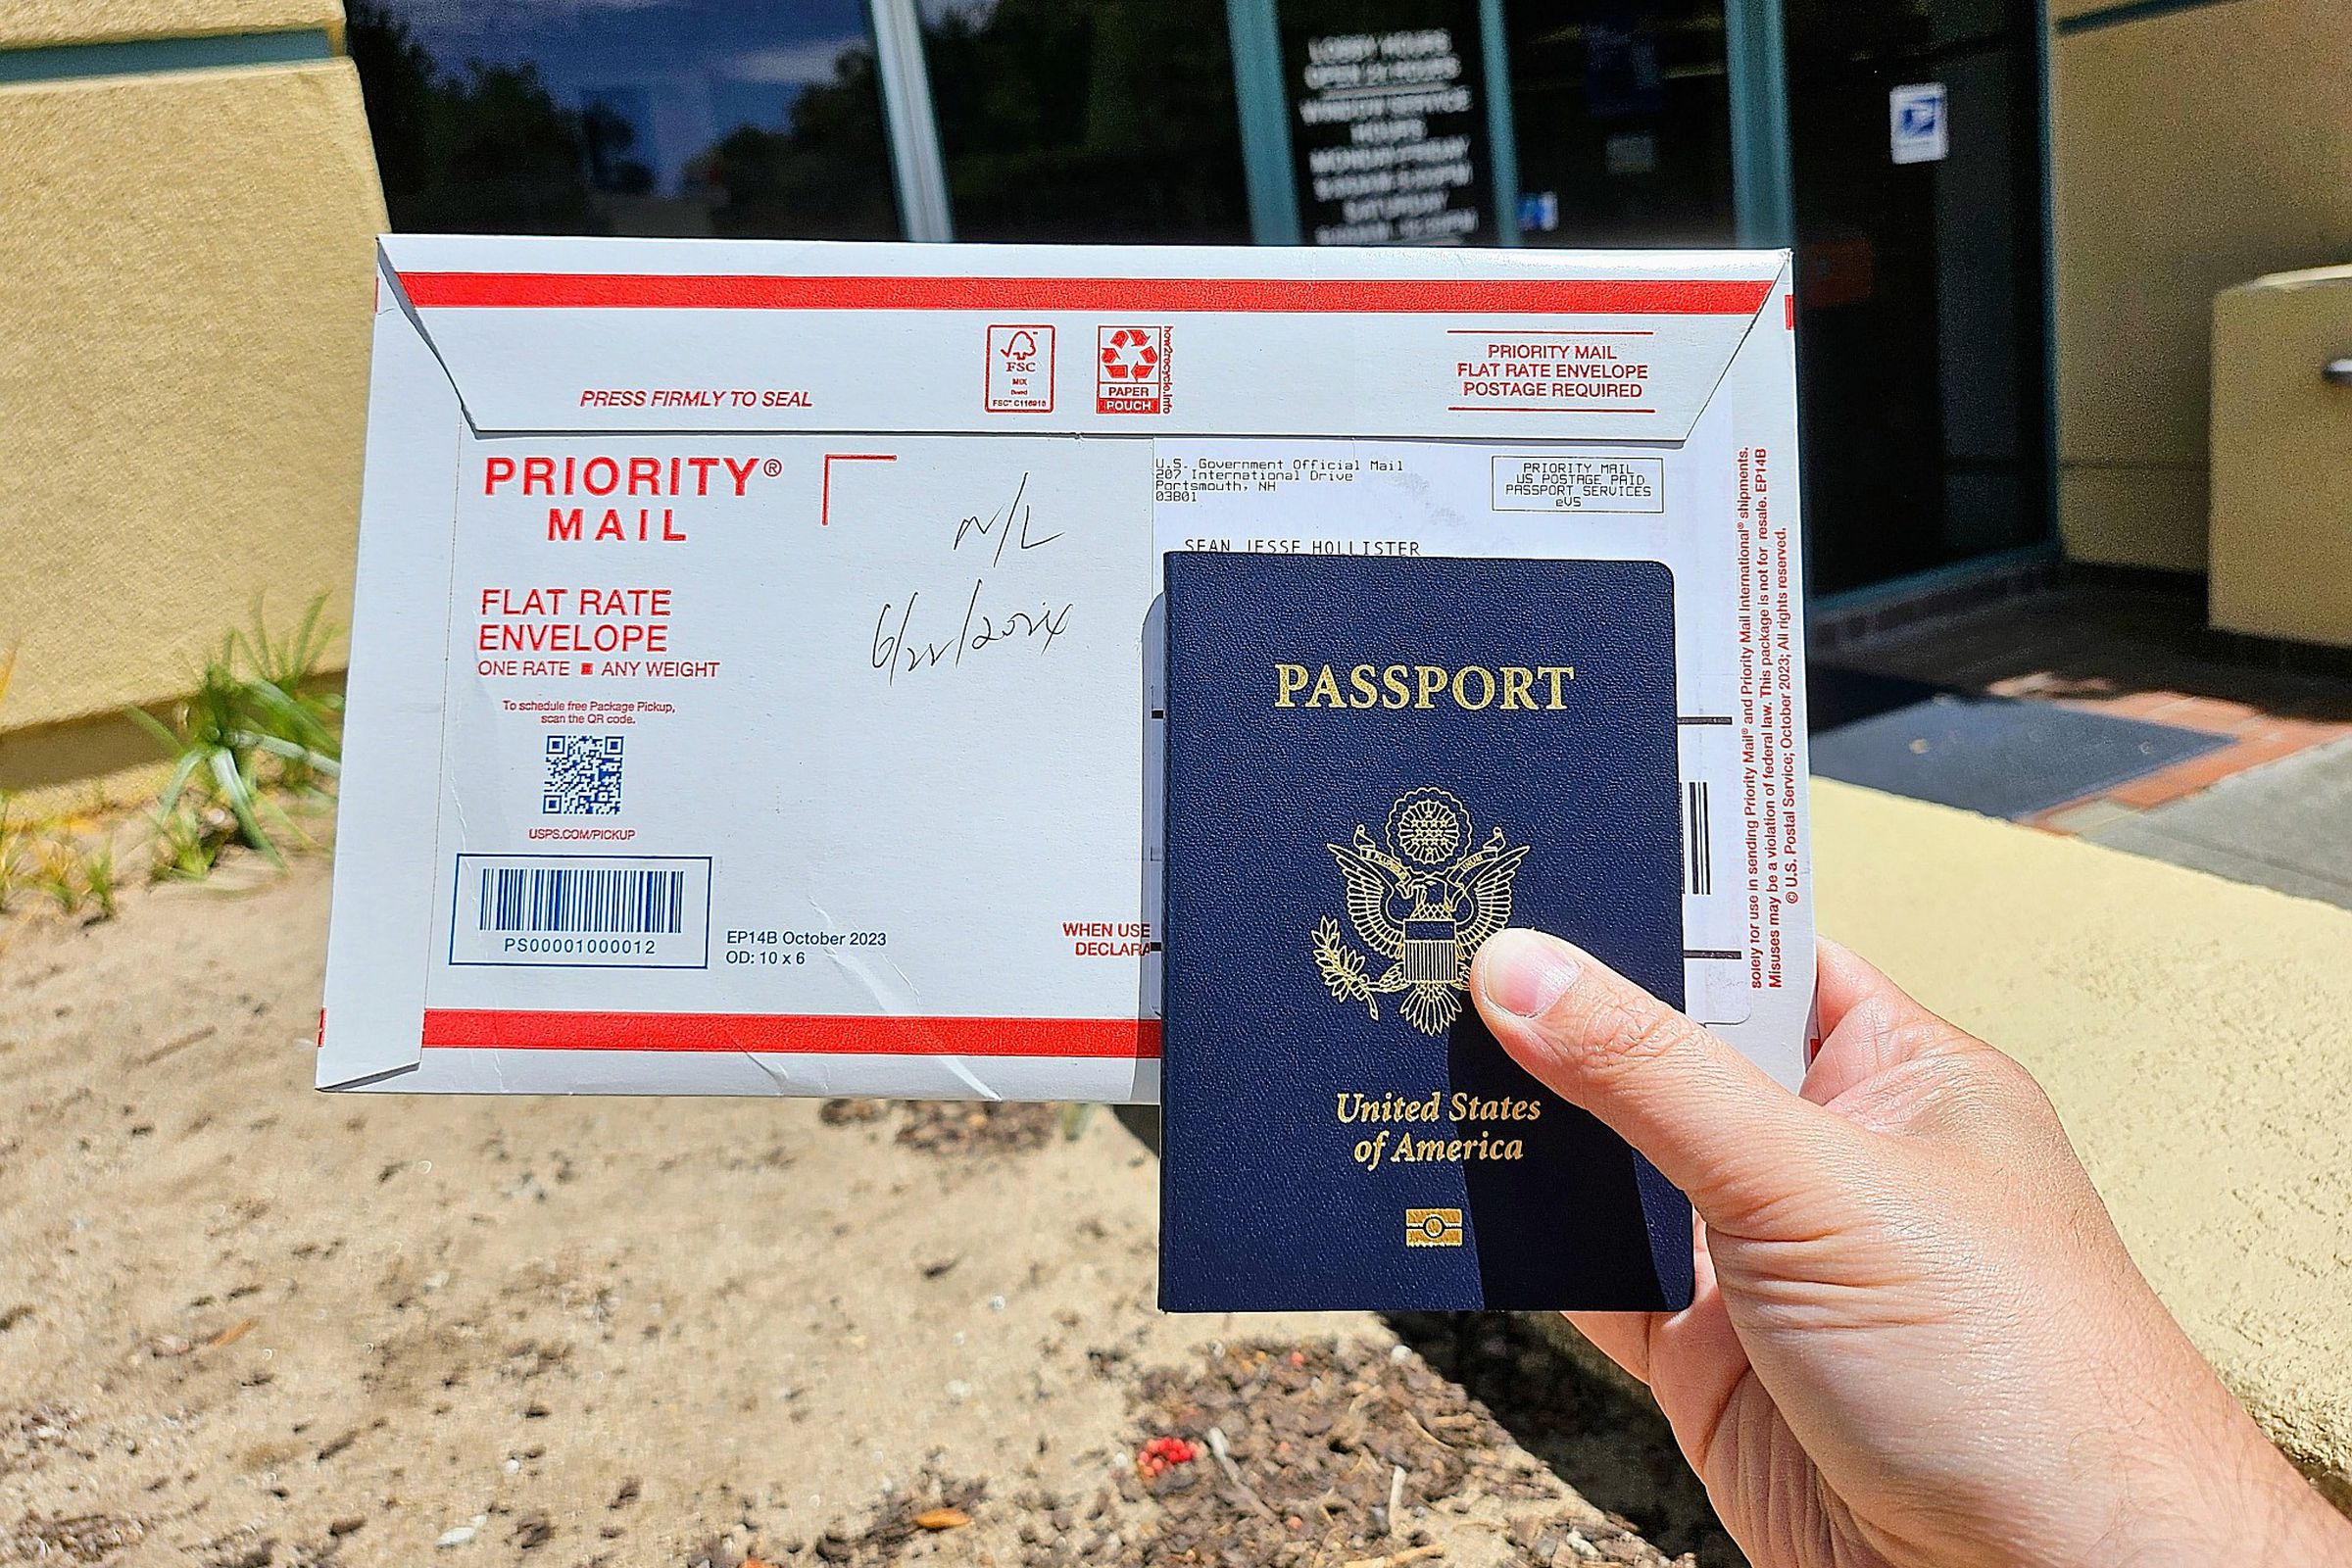 Picking up my new passport at the post office.